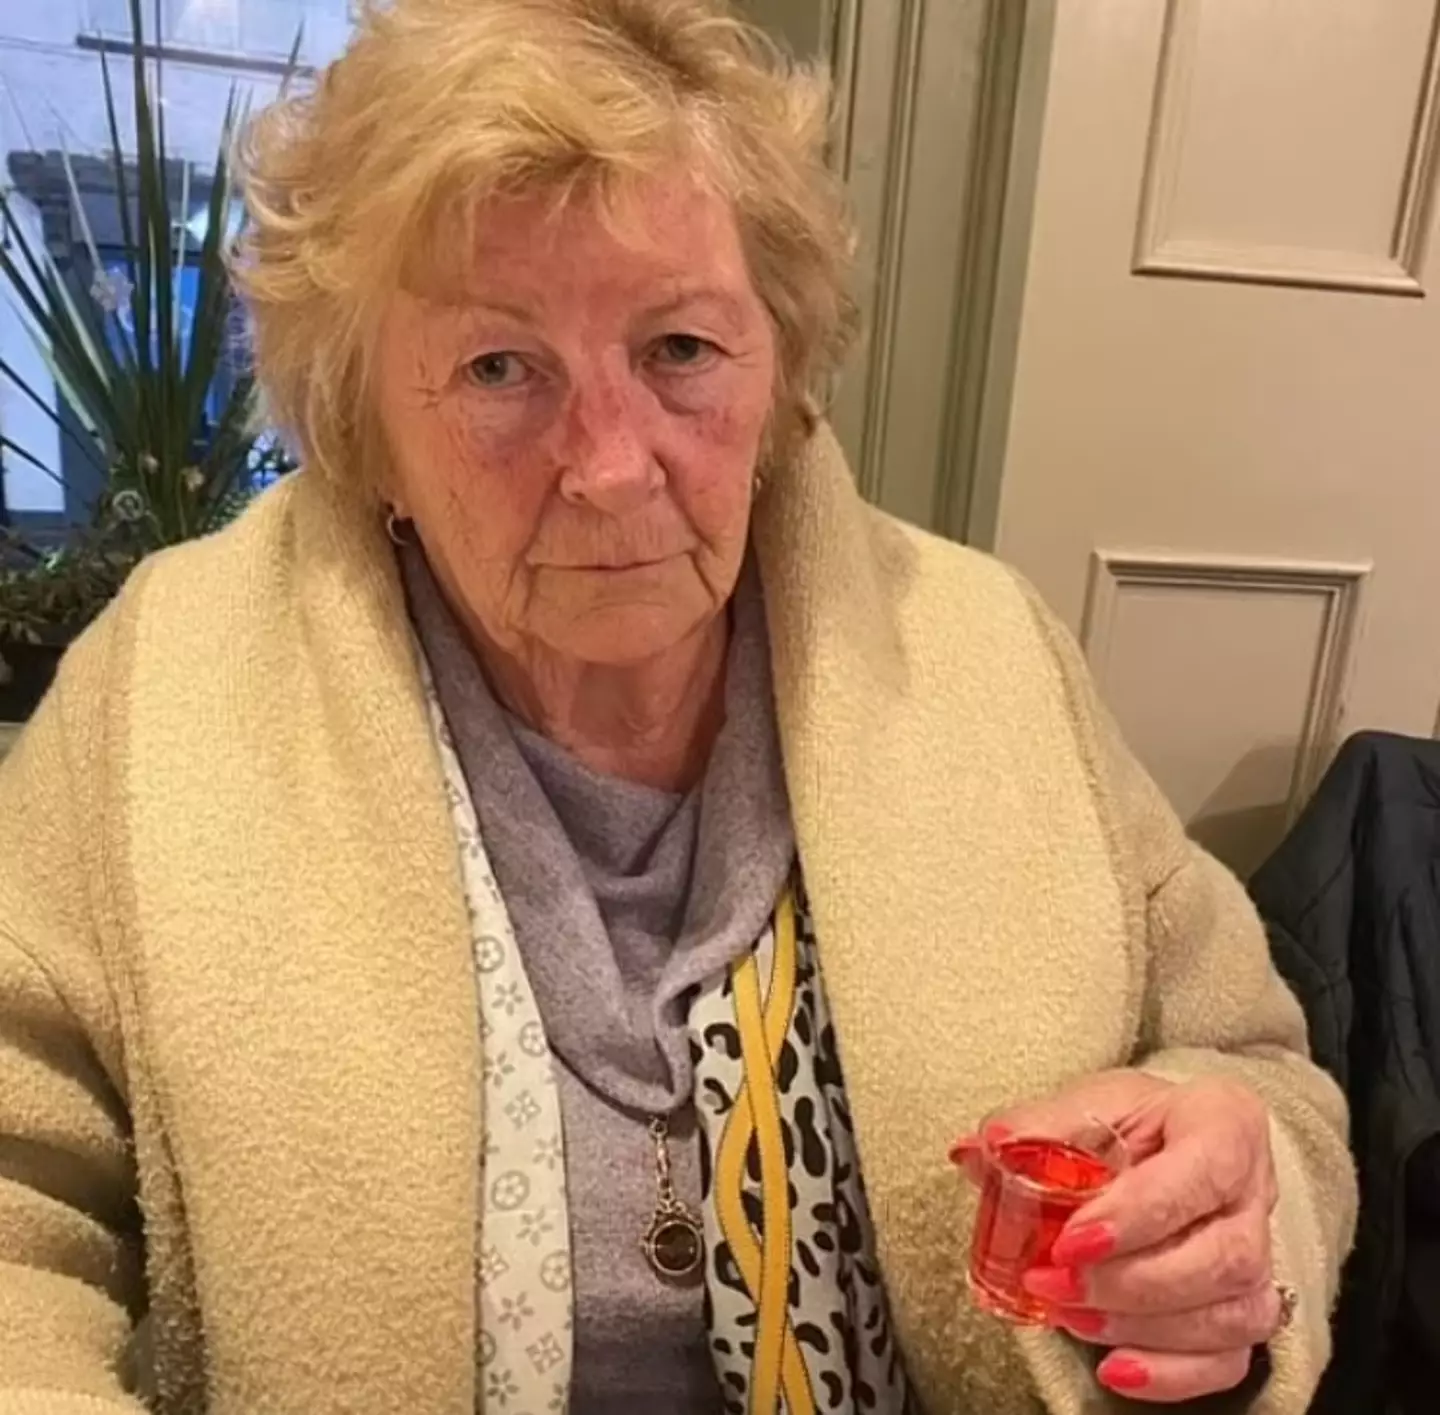 'Nana doesn't know what's hit her', players of the Wetherspoons game joked as they ordered her shots.